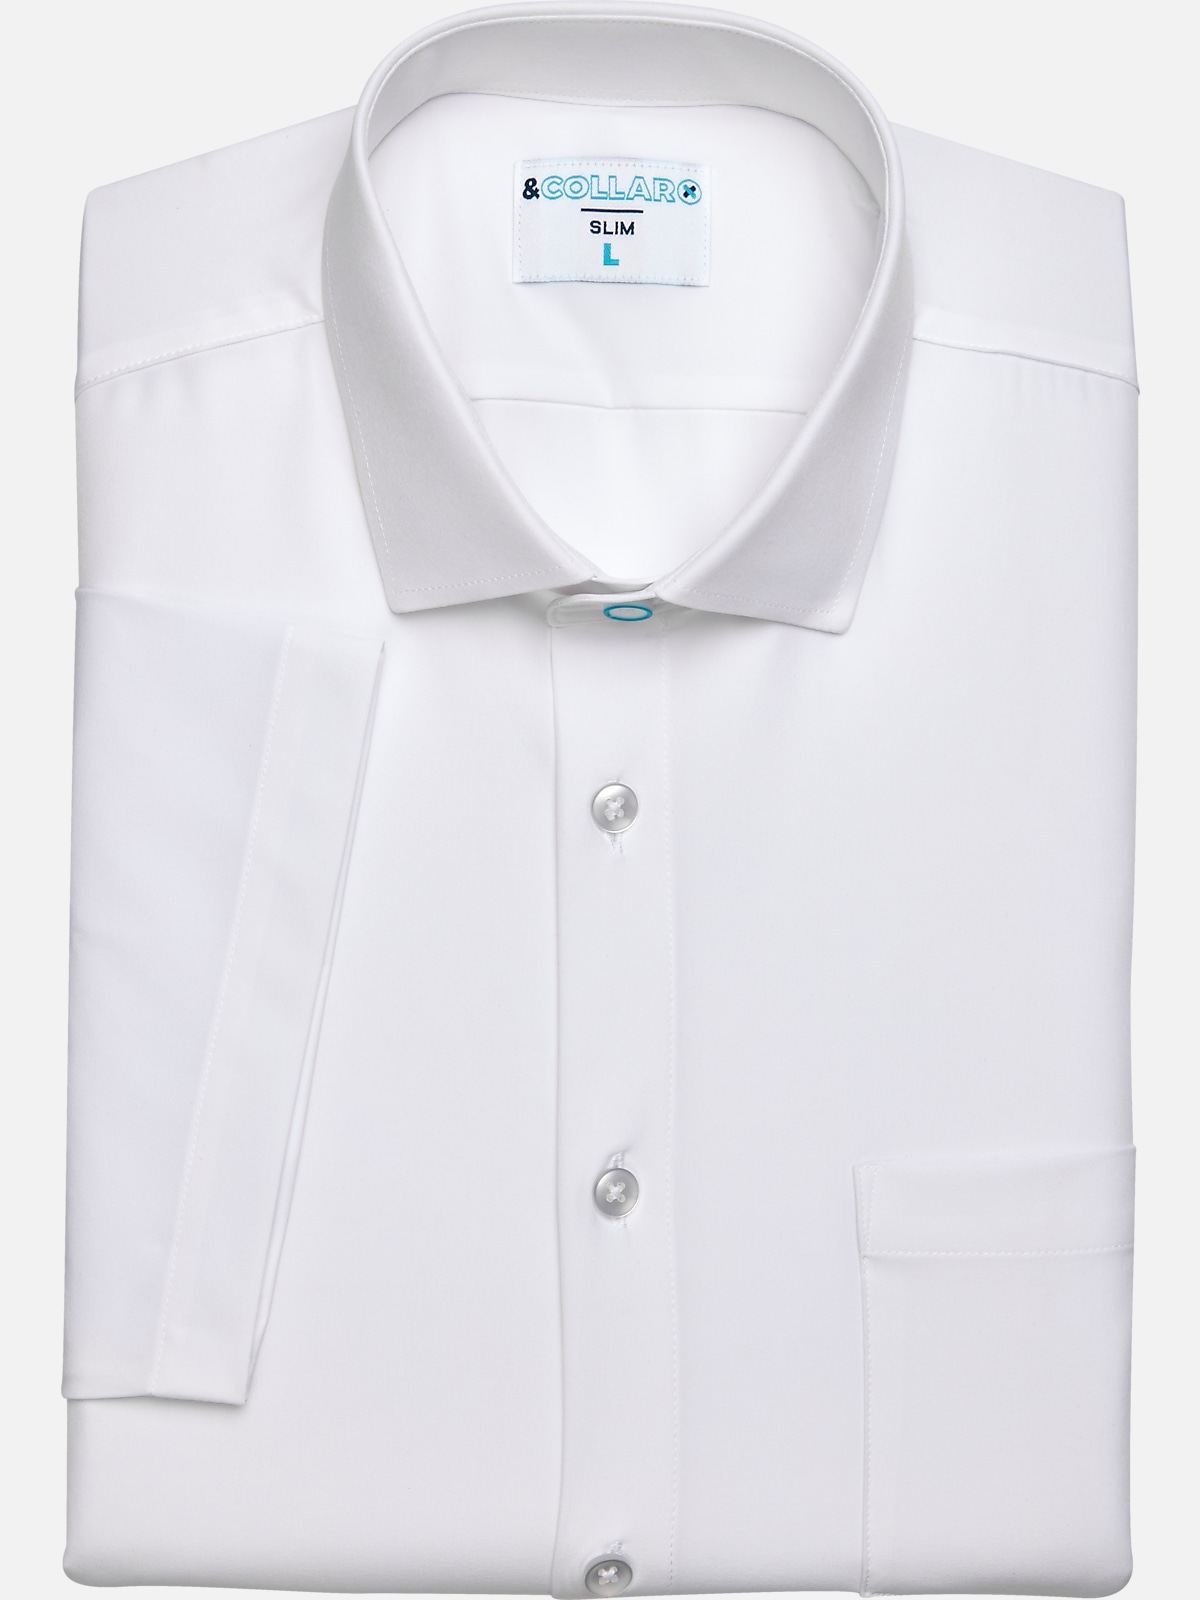 &Collar Pacific Slim Fit Short Sleeve Dress Shirt | The Casual Shop ...